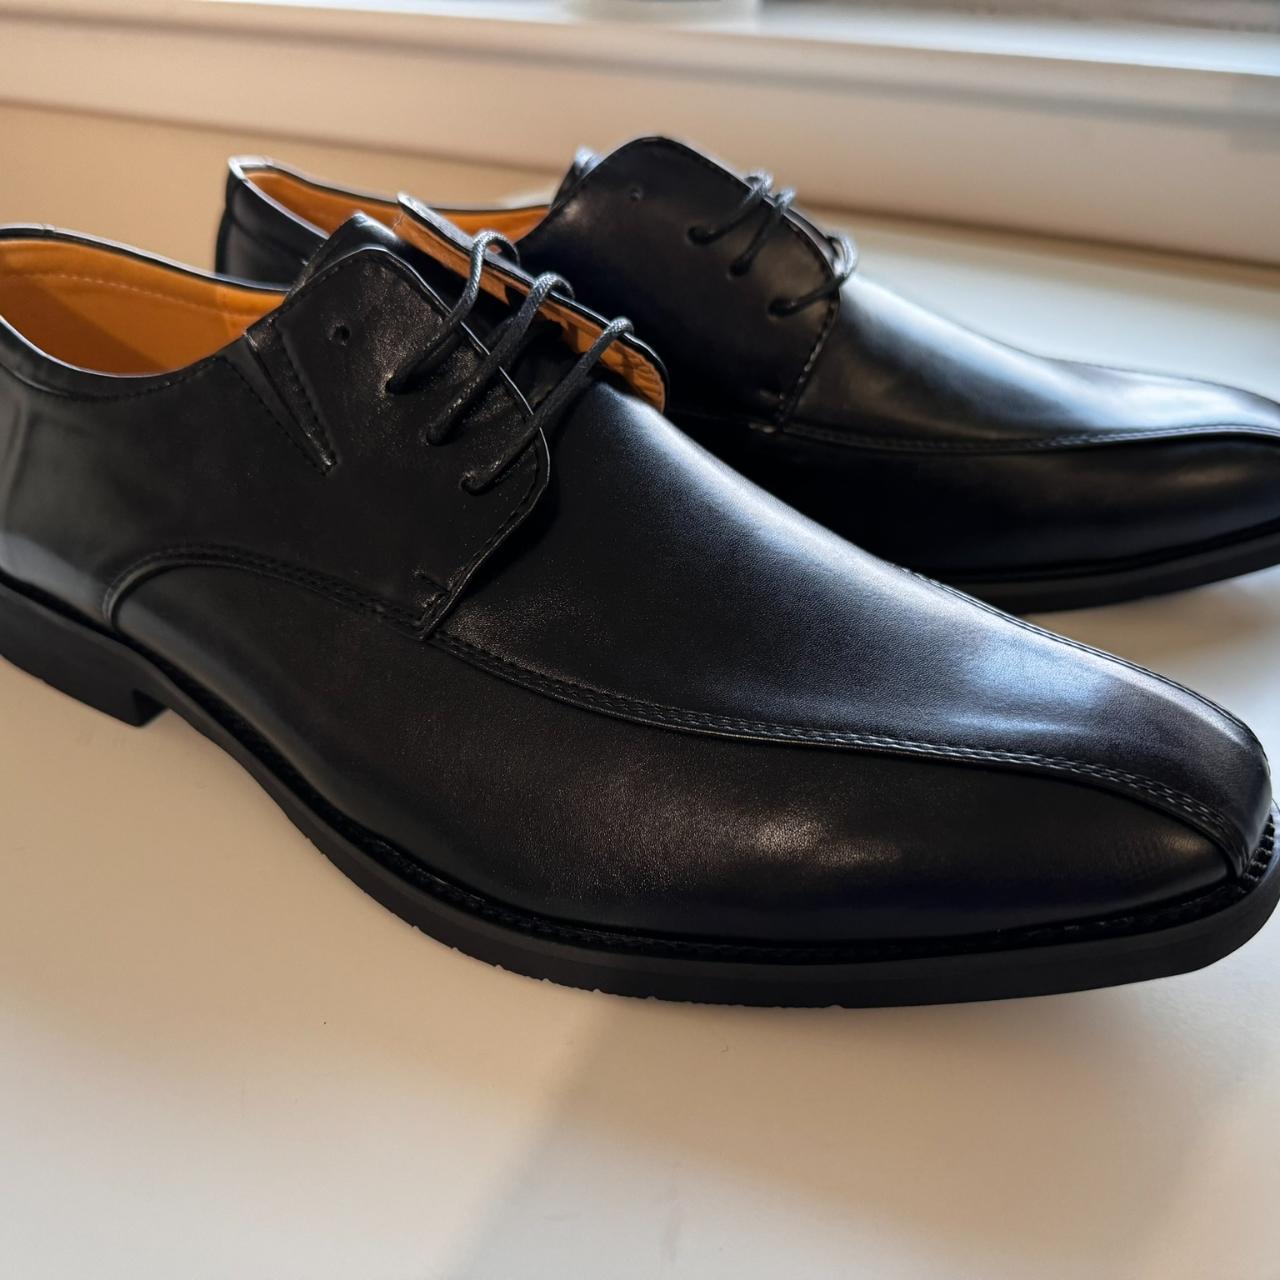 Formal Derby/Oxford Shoes - 11 UK I bought these a... - Depop